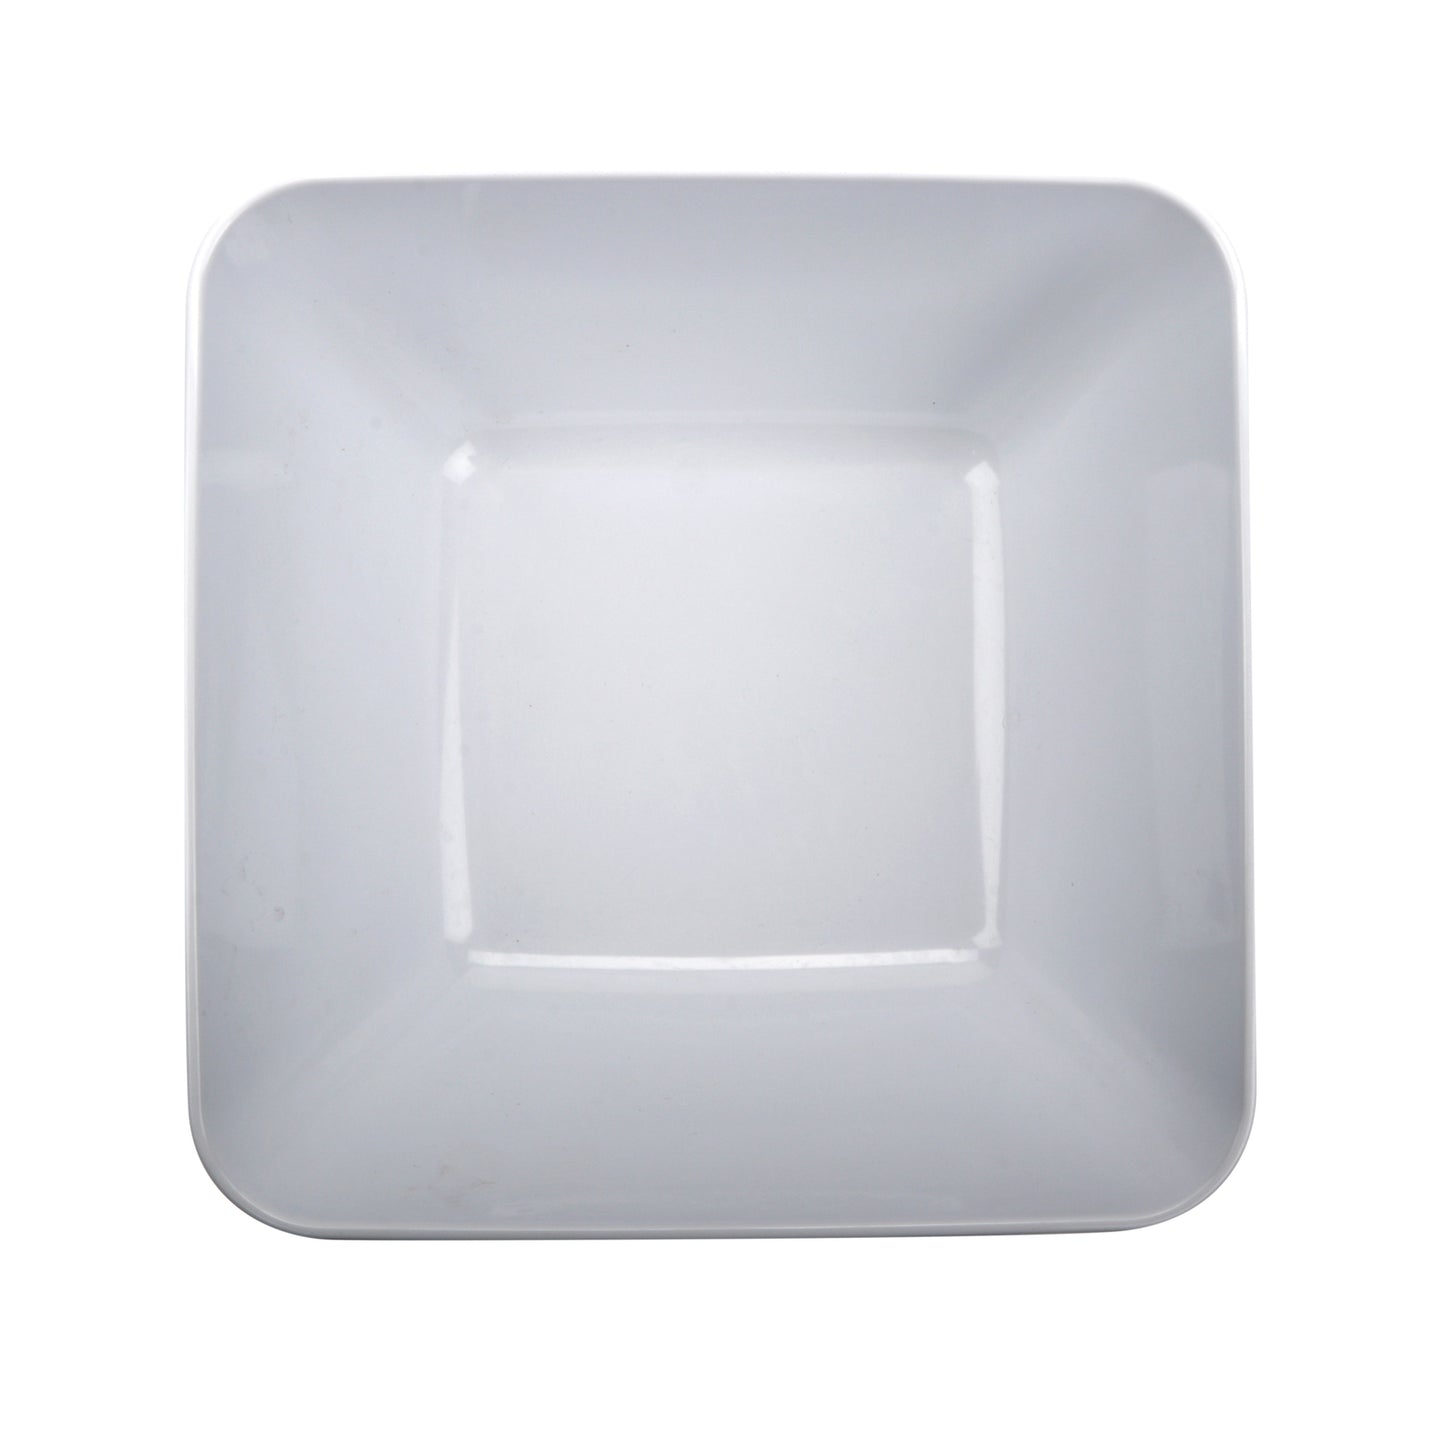 6 qt. Melamine, White, Square Large Display Bowl with Rounded Corners, (6.1 qt. rim-full), 4.25" Deep, G.E.T. Midtown